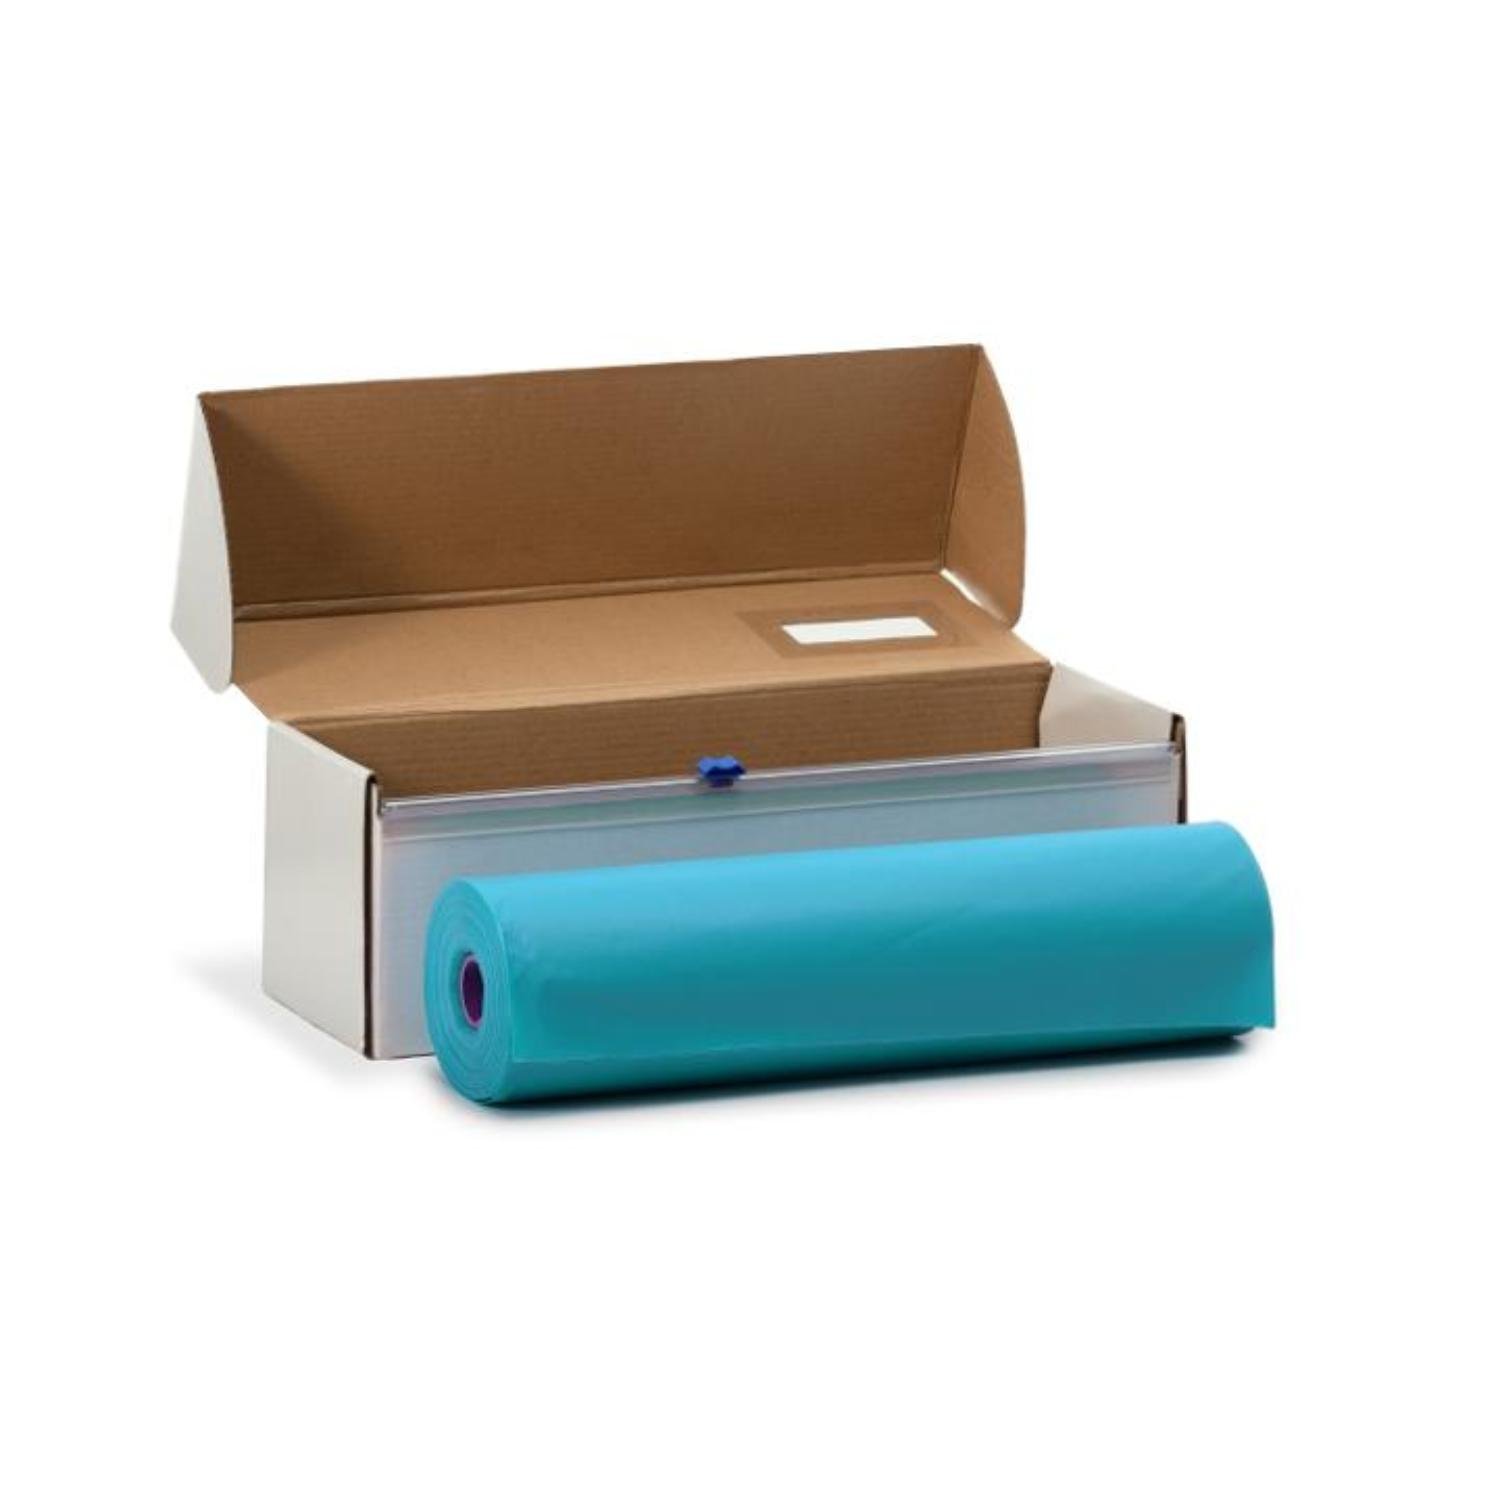 54 In. X 100 Ft. Select A Size Table Cover-Turquoise - Case of 6